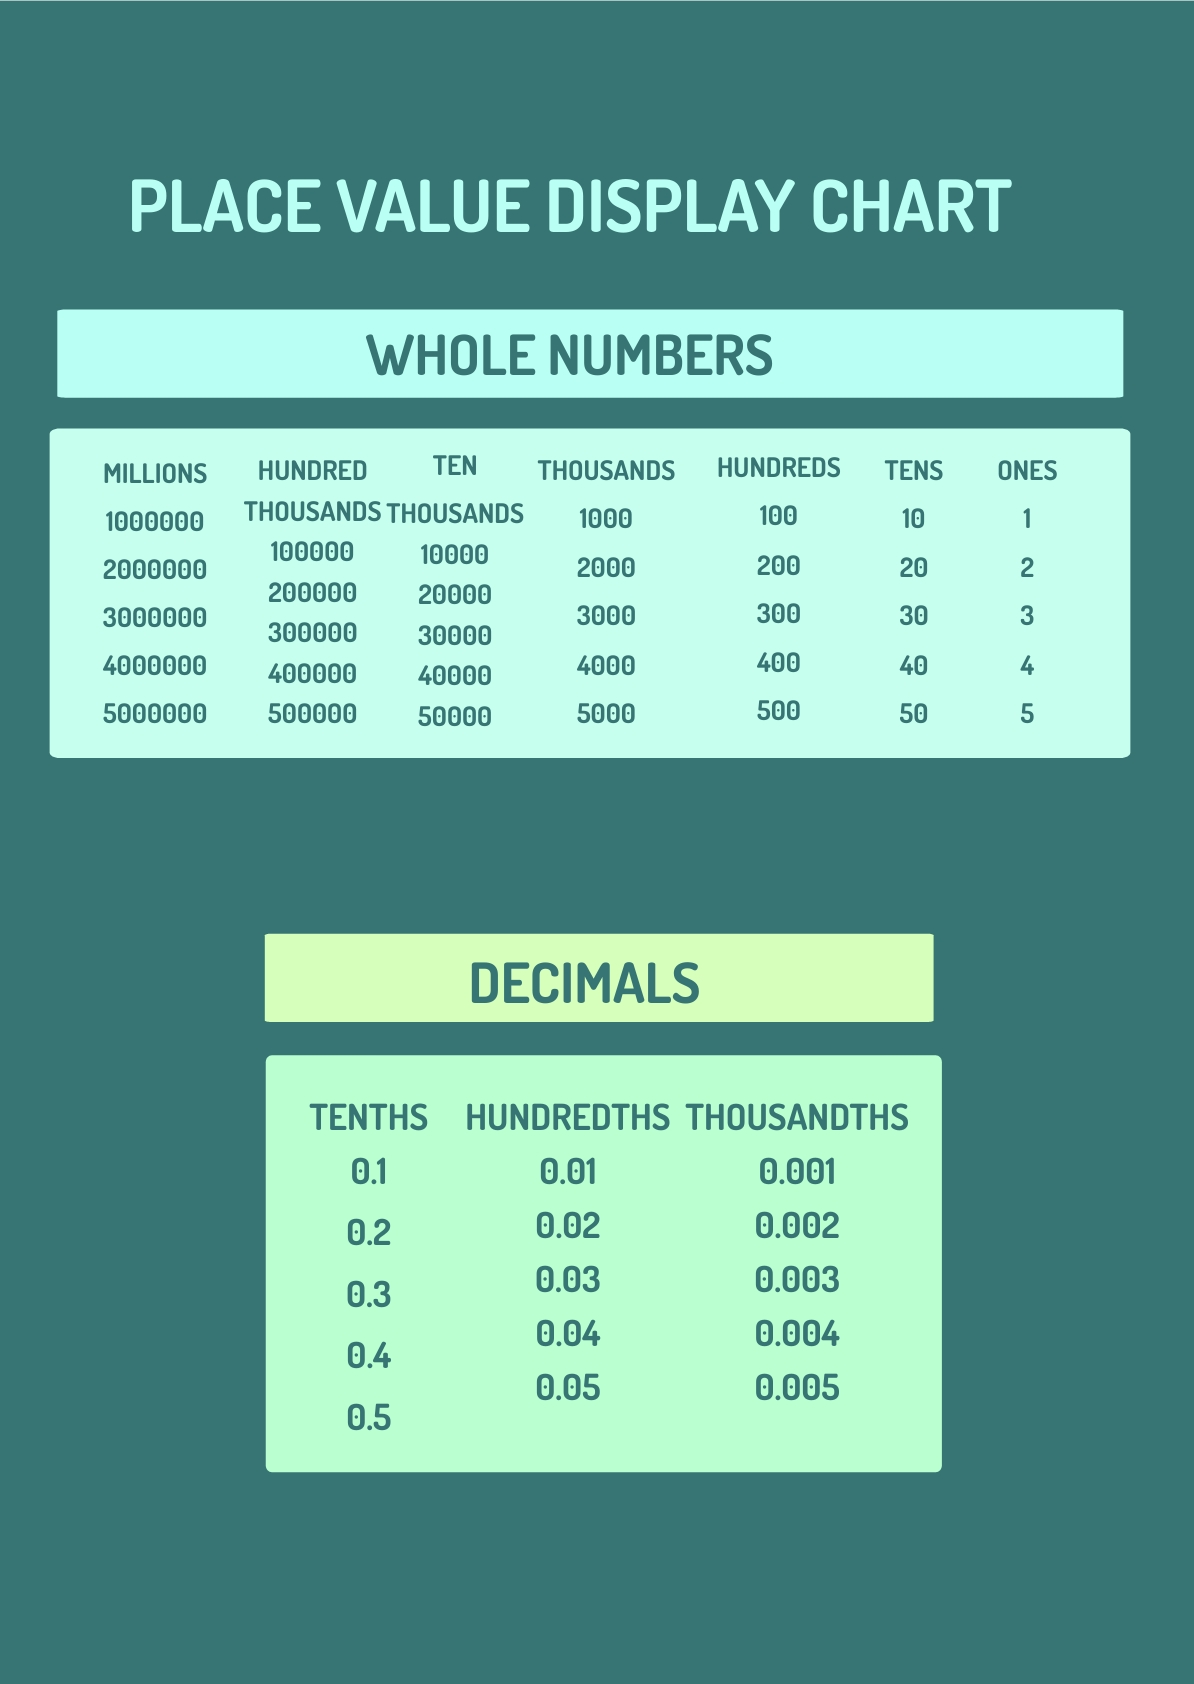 Place Value Display Chart in PDF, Illustrator